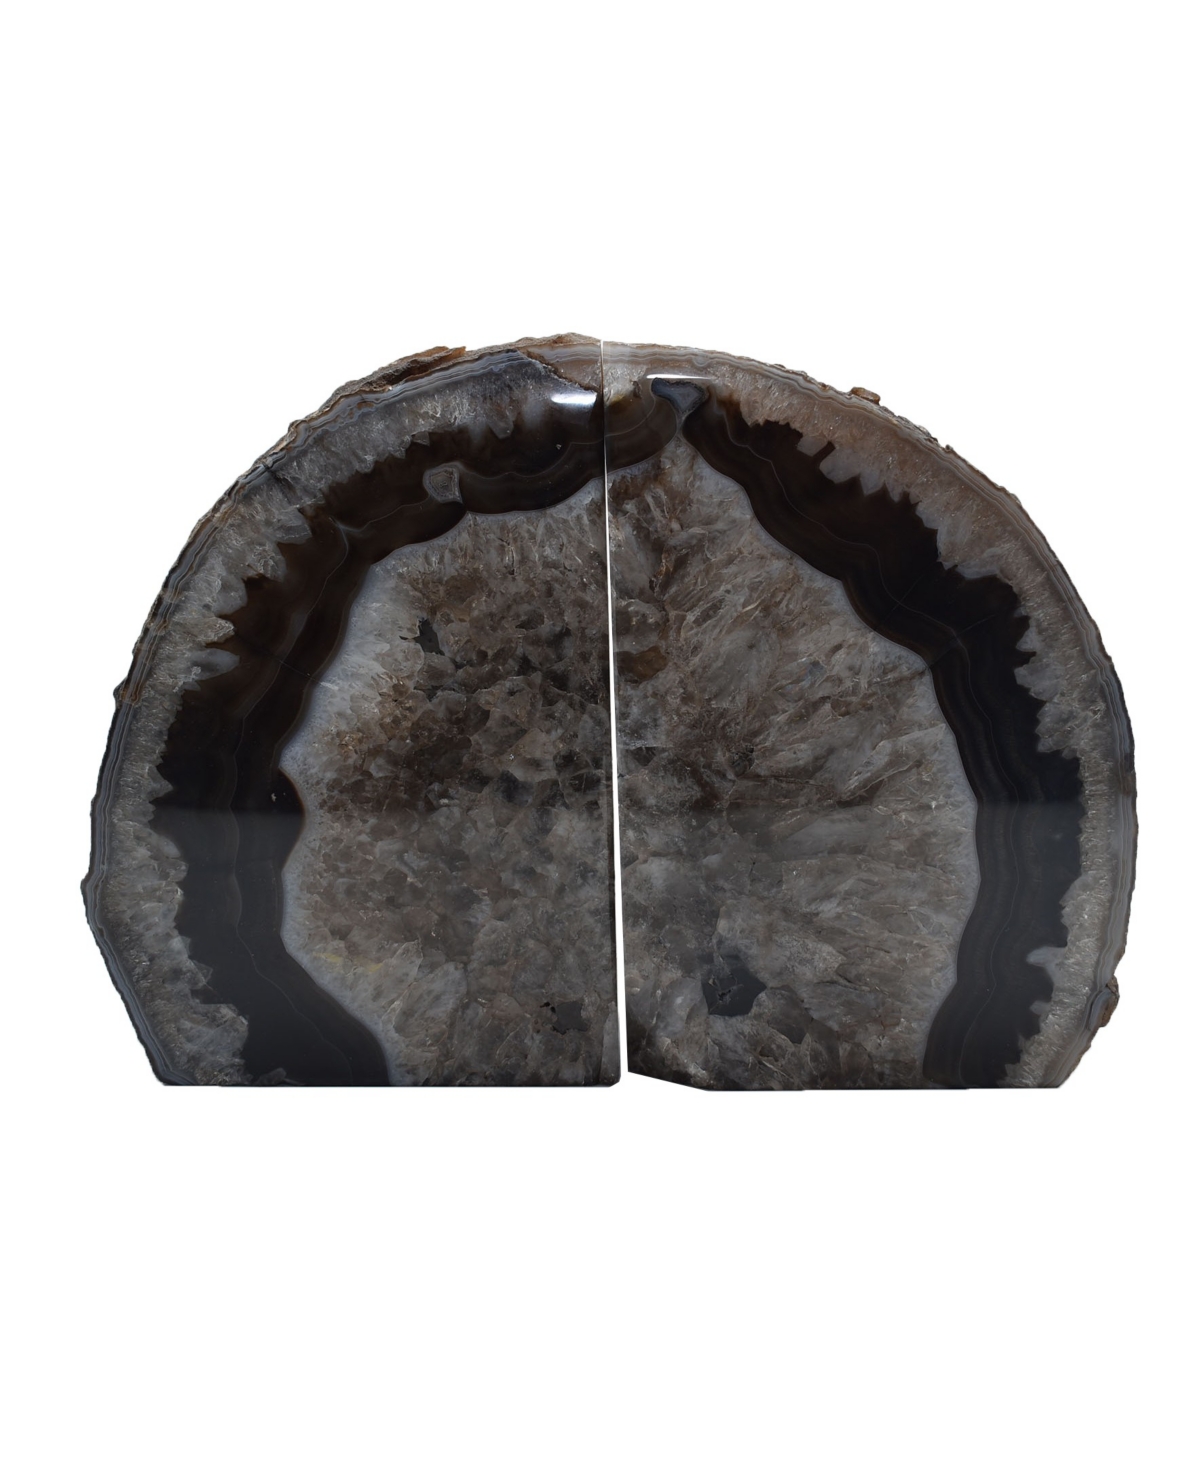 Nature's Decorations - Premium Agate Extra-large Bookends In Black